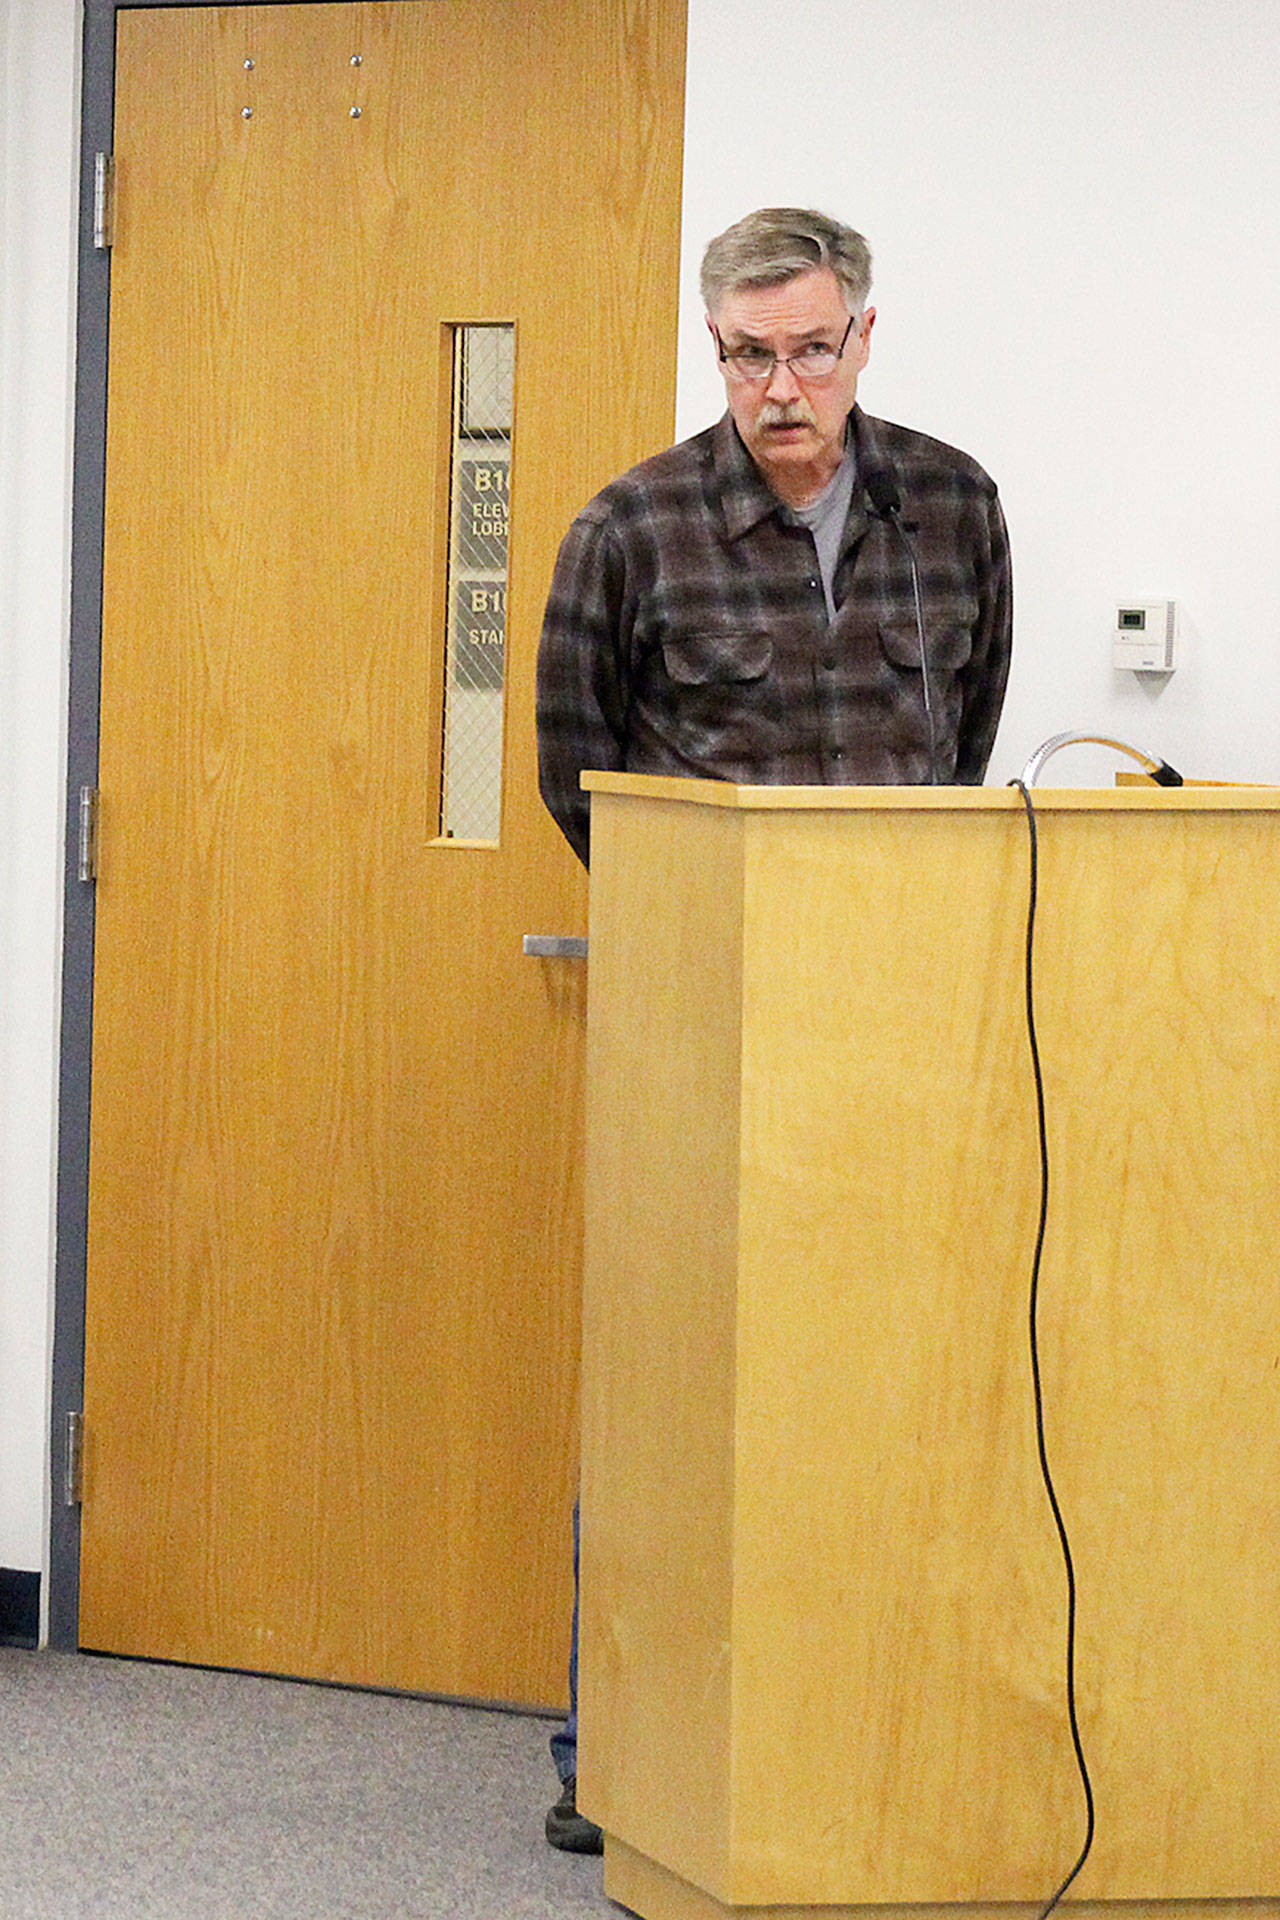 Paal Cammermayer asks the planning commission to propose allowing rural event centers on land zoned rural forest at a event code public hearing Monday night. Photo by Laura Guido/Whidbey News Group